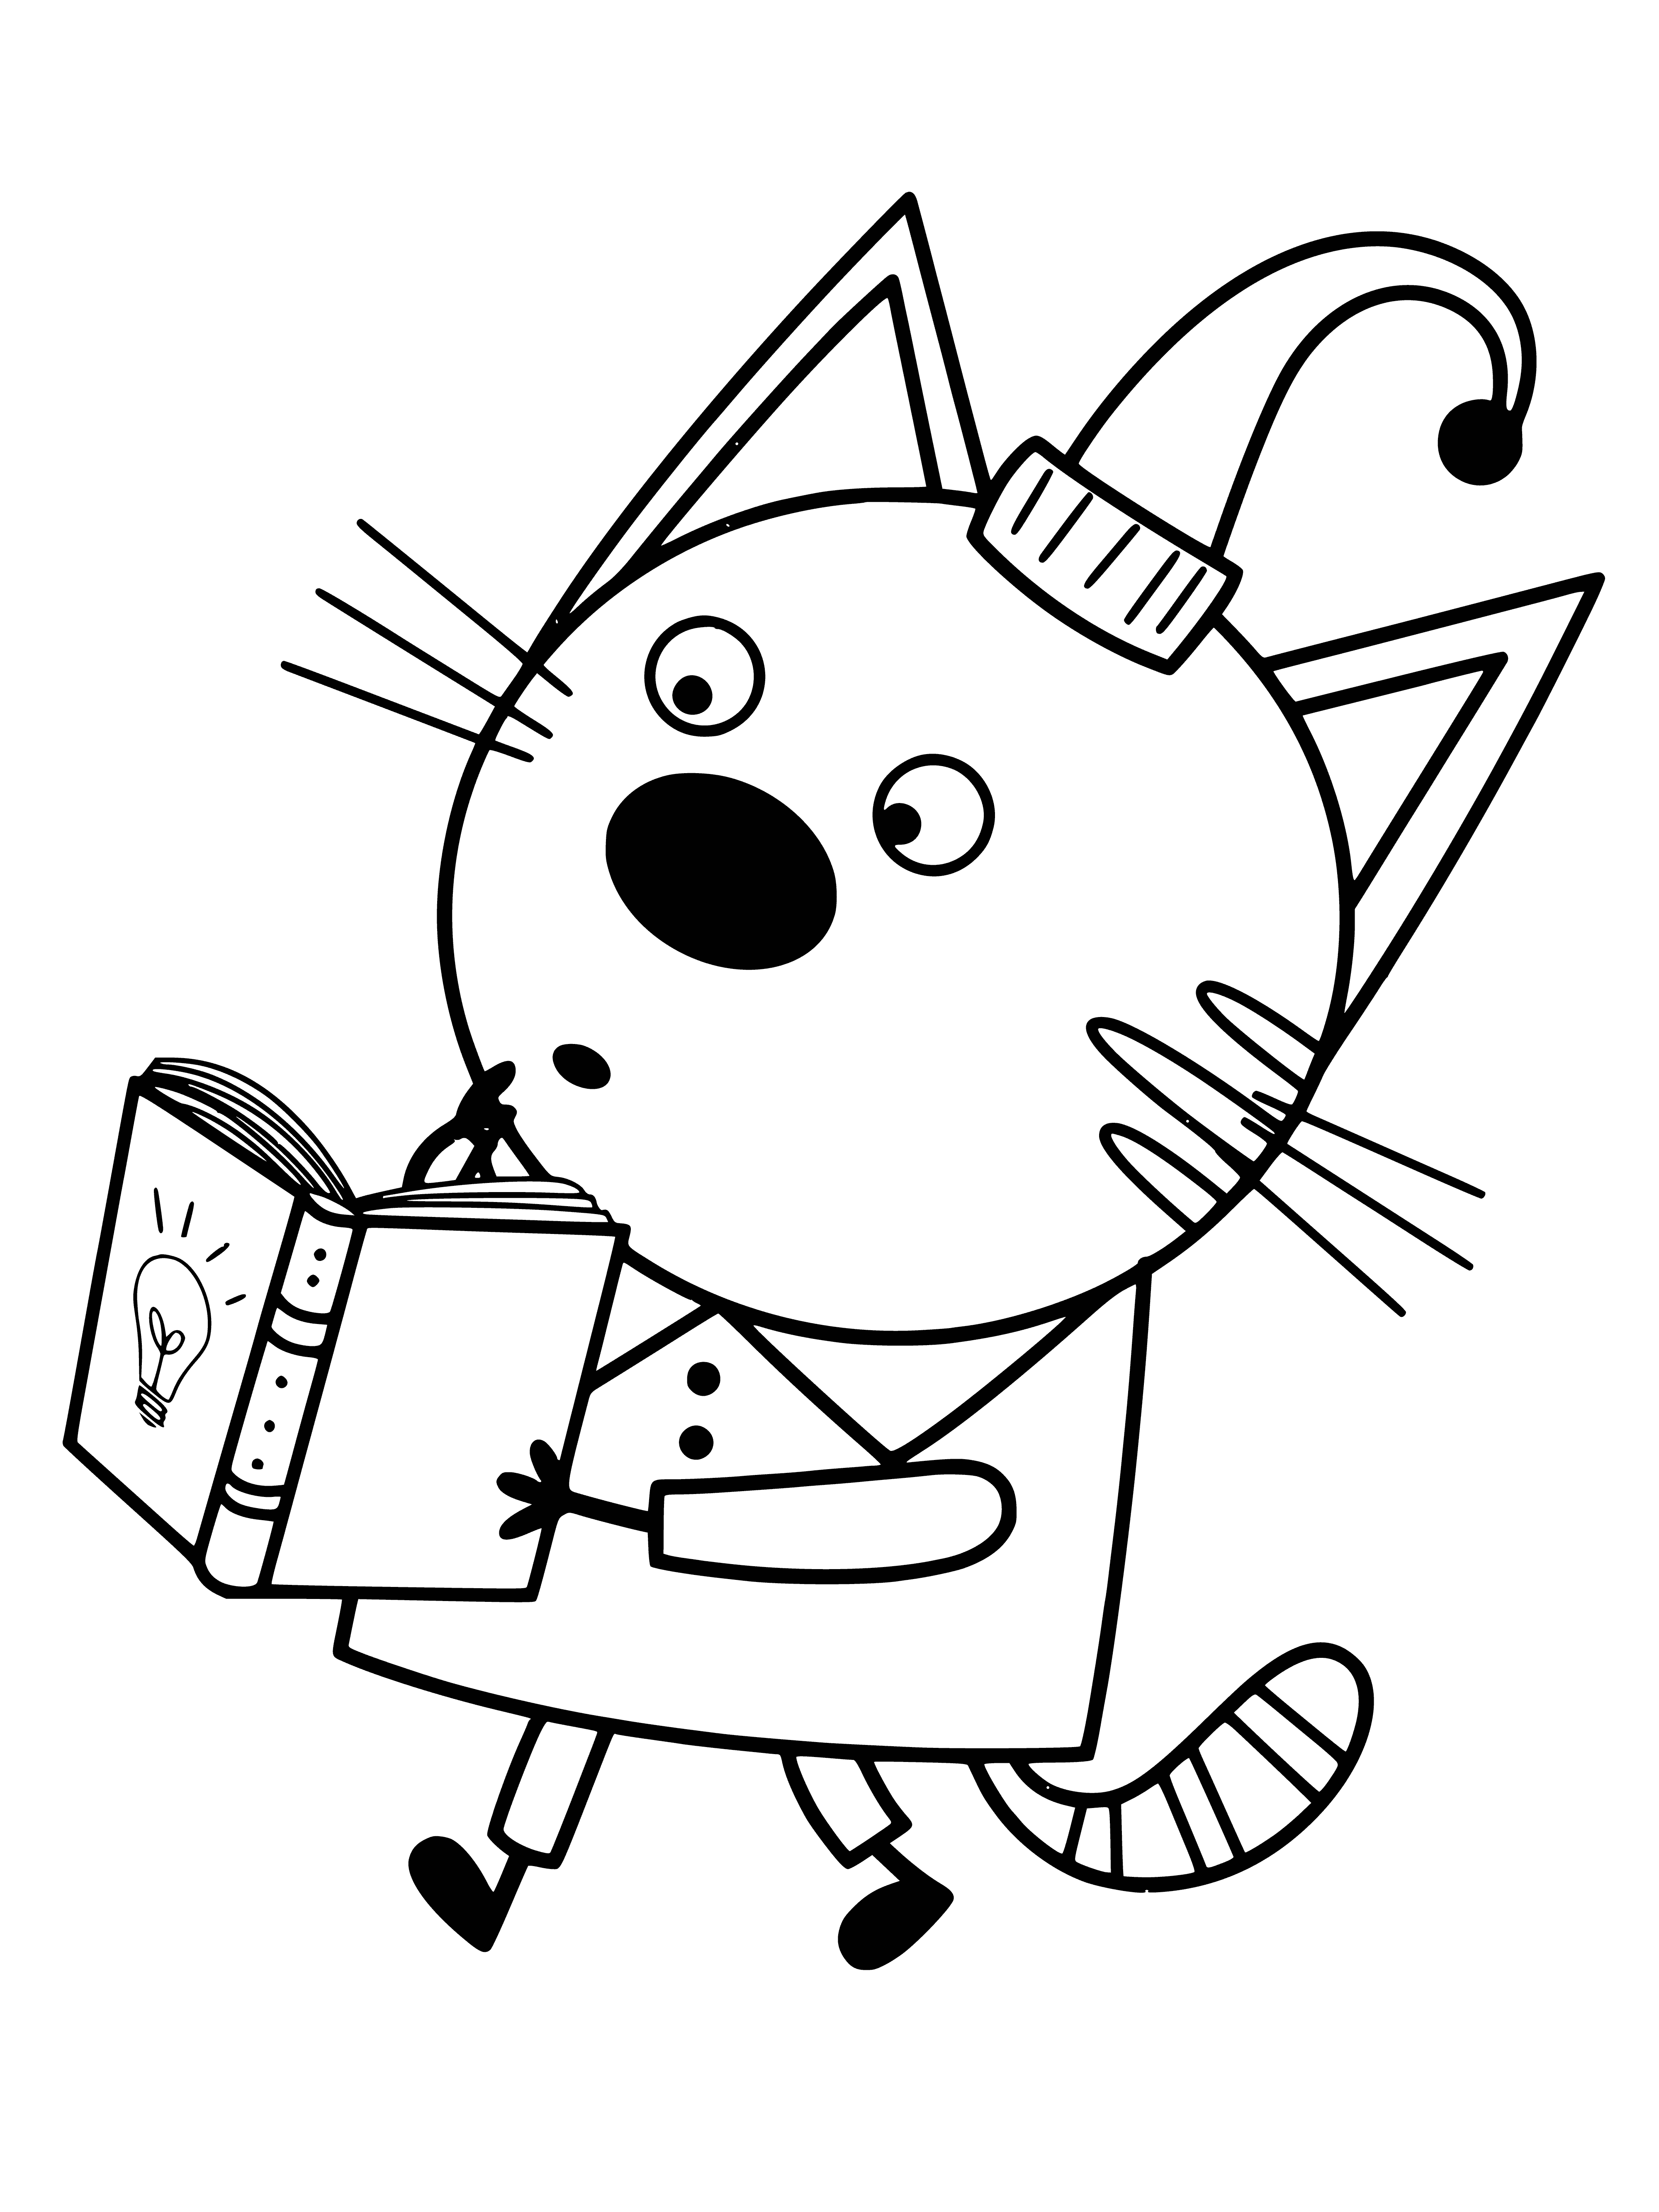 coloring page: Three cats of diff. colors stand on a plate w/ spoon next to it.